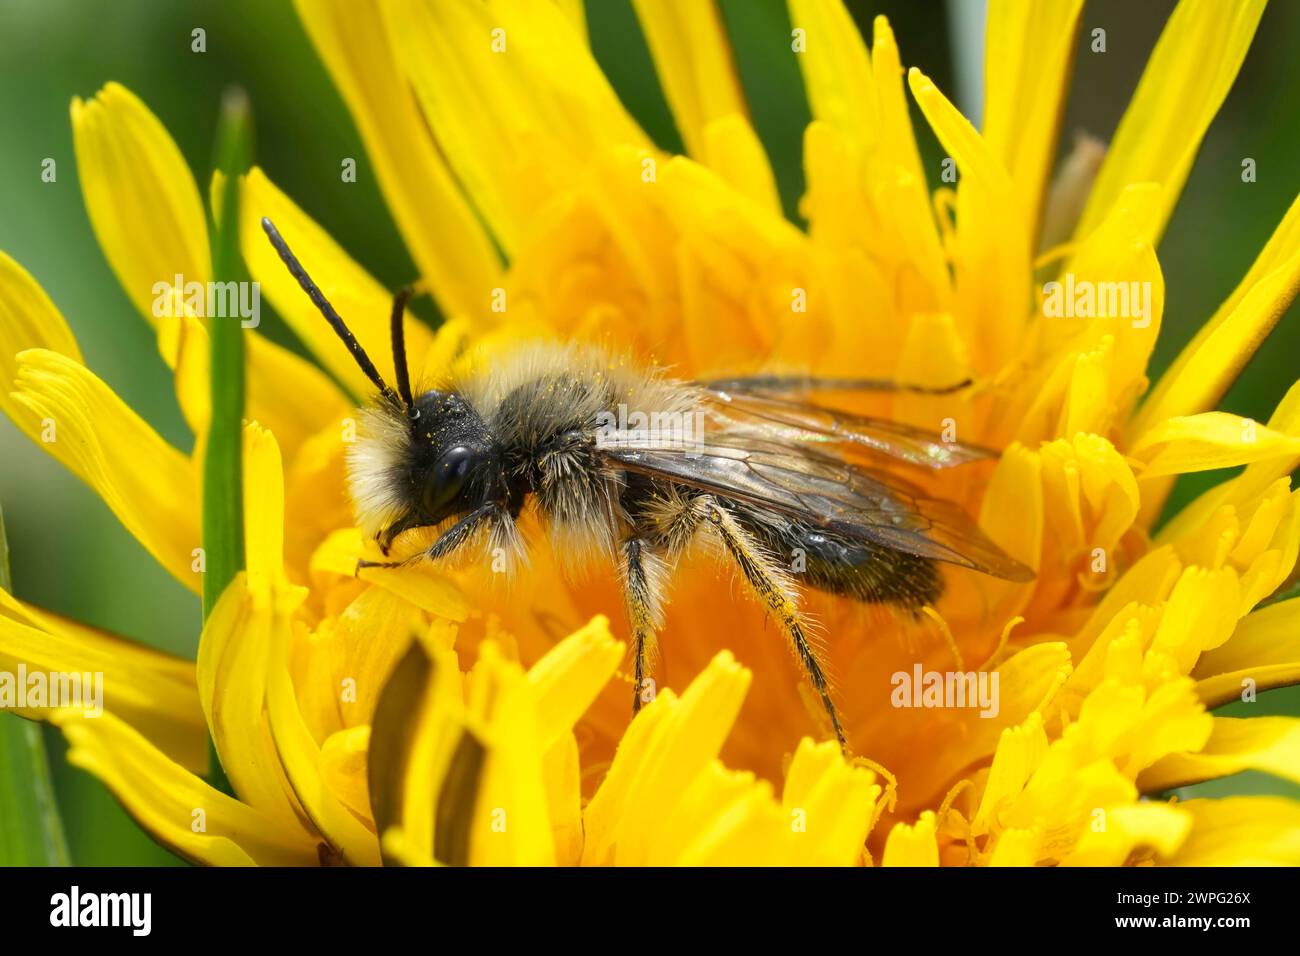 Colorful closeup on a male Nycthemeral mining bee, Andrena nychtemera in a yellow dandelion flower Stock Photo